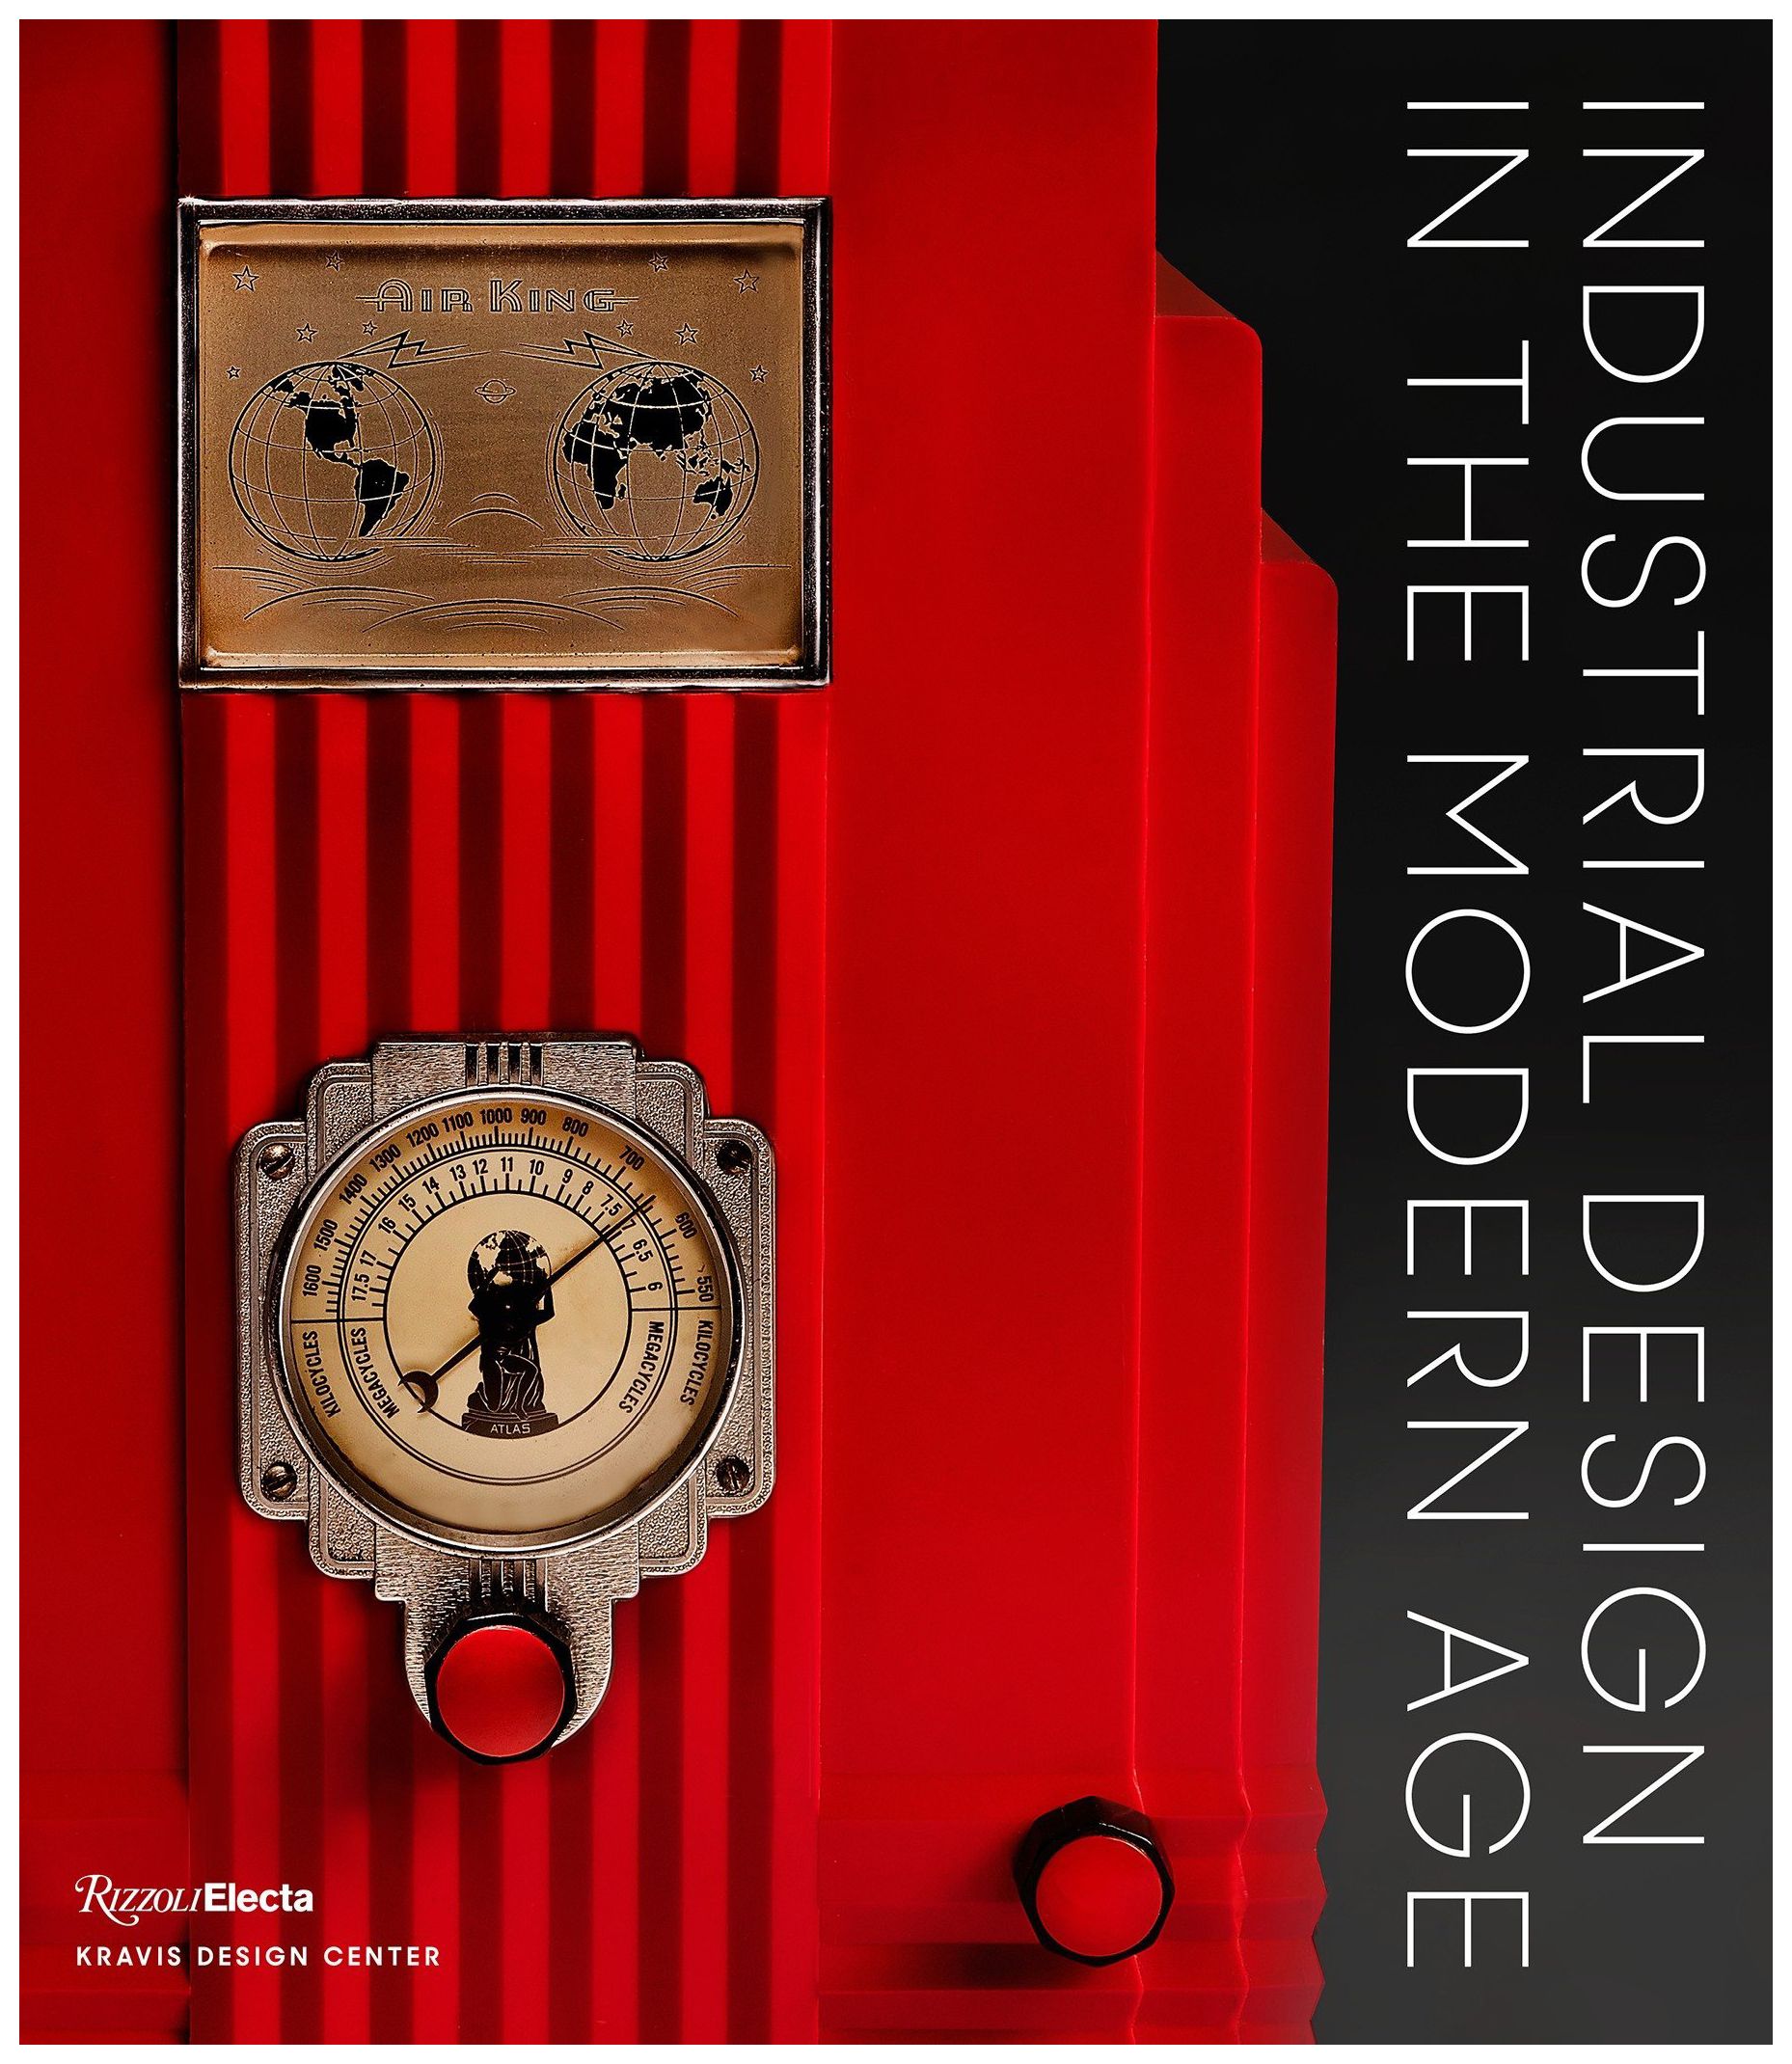  - Industrial Design in the Modern Age